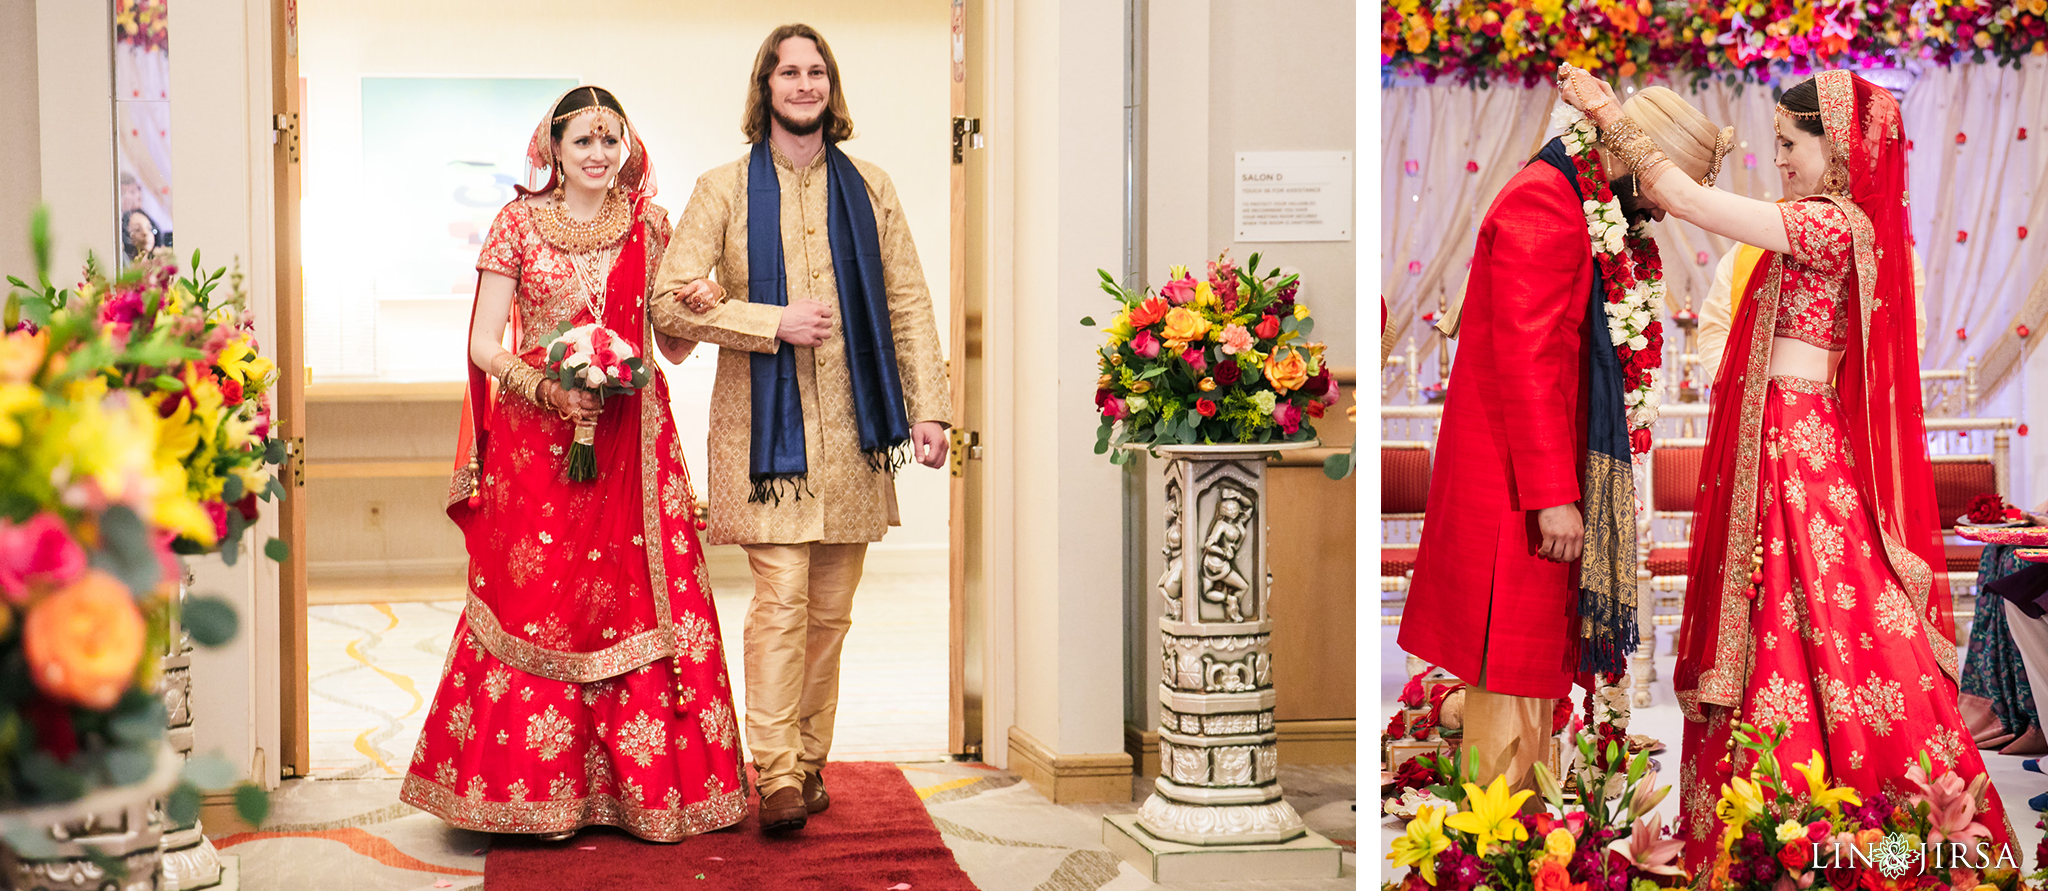 18 Hotel Irvine Multicultural Indian Wedding Photography